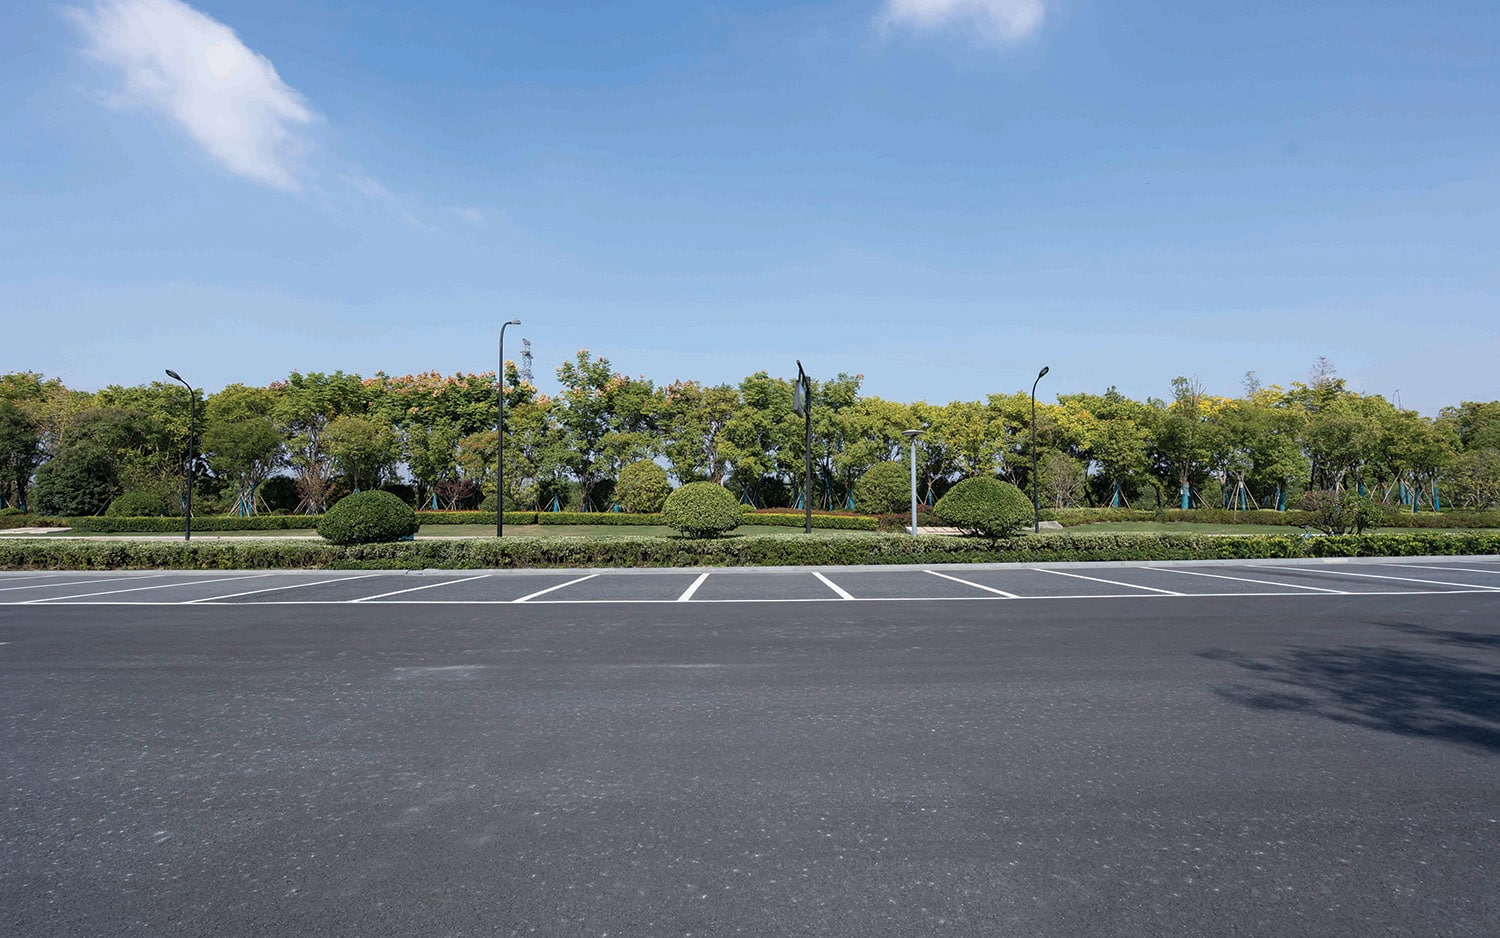 Empty parking spaces alongside a landscaped area with trees and bushes on a clear day.